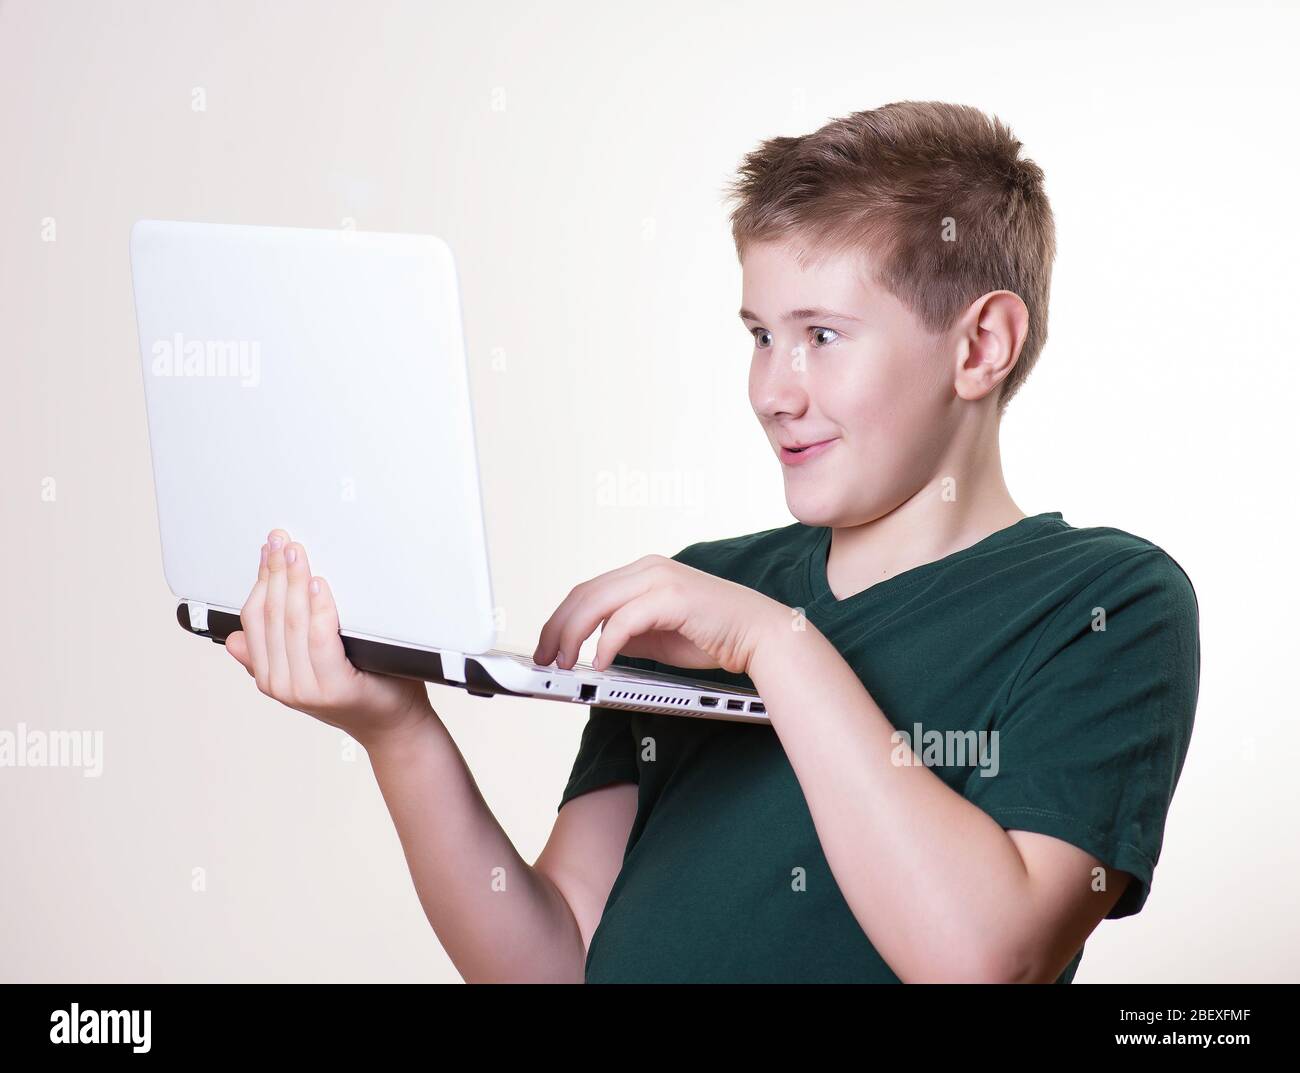 excited 10 - 12 years old boy (teenager) use his laptop Stock Photo